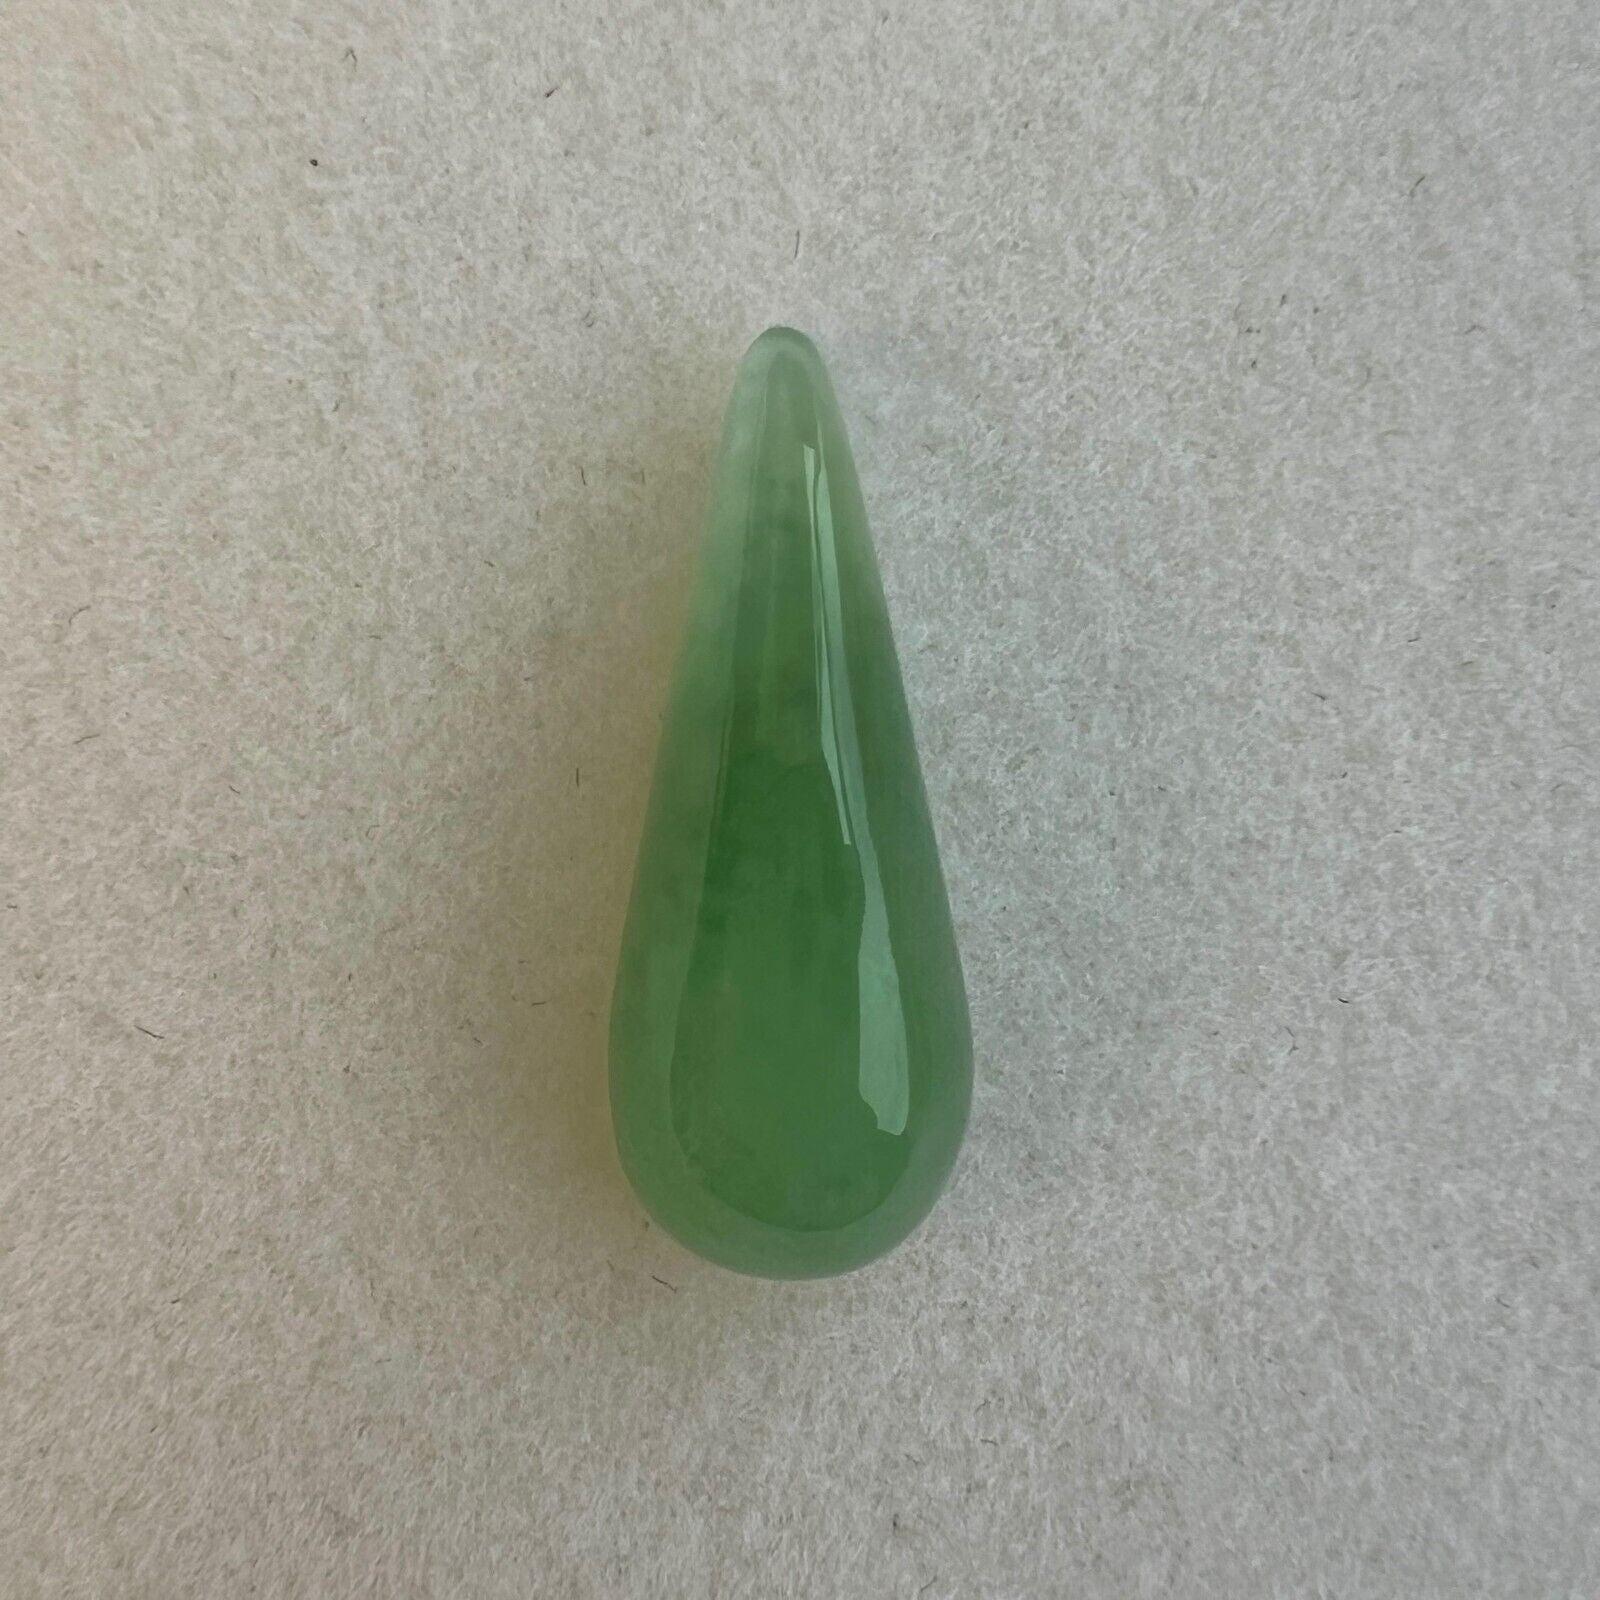 4.38Ct Green Jadeite Jade IGI Certified Natural ‘A’ Grade Pear Cabochon Gem

IGI Certified Untreated A Grade 'Apple' Green Jadeite Gemstone.
4.38 Carat with an excellent pear cabochon cut and bright 'apple' green colour. Fully certified by IGI in